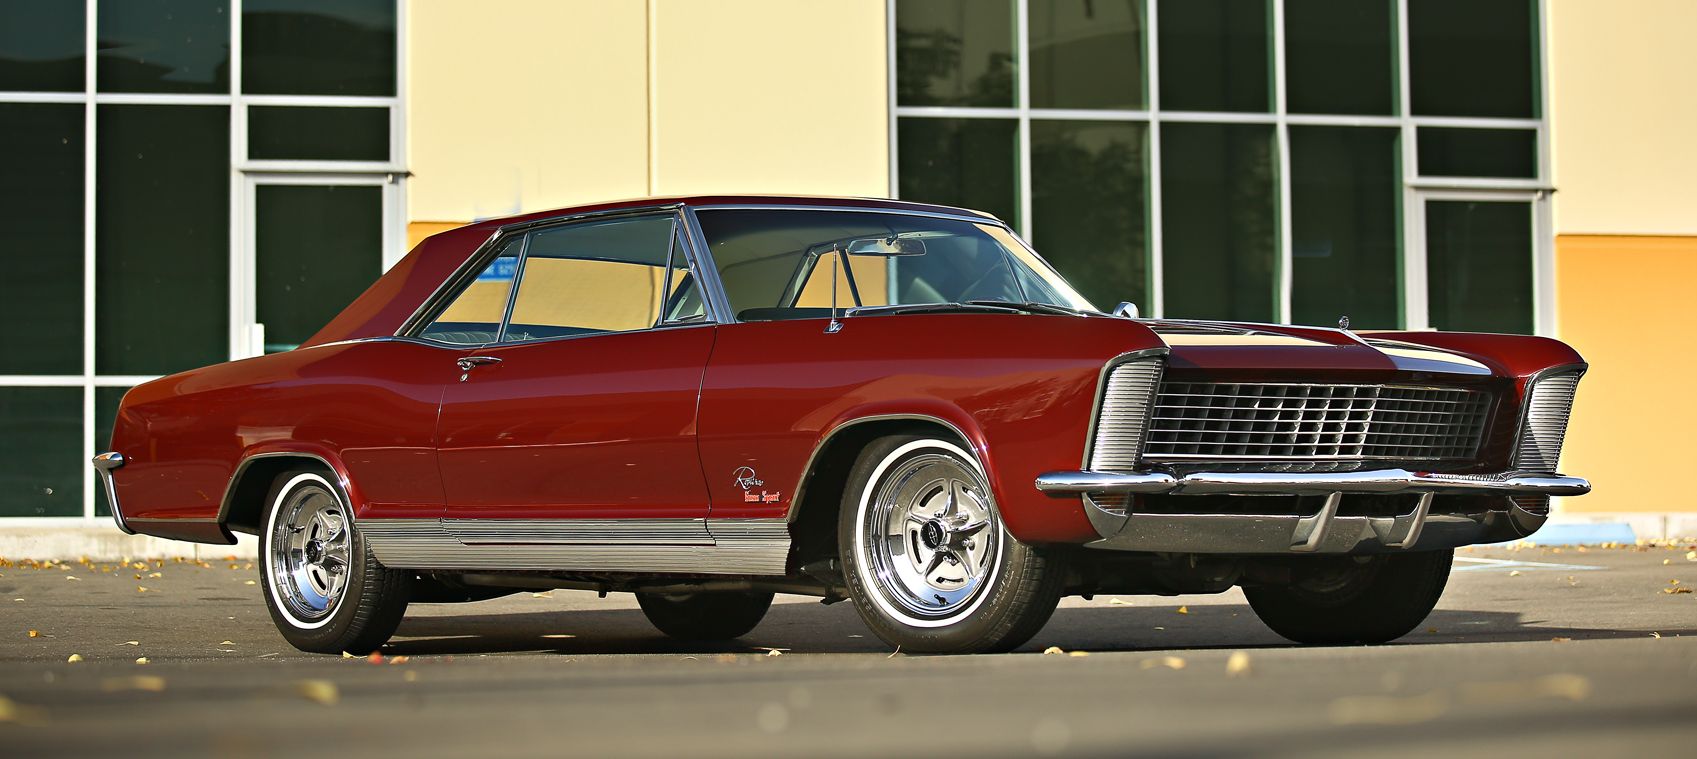 Nice Images Collection: Buick Riviera GS Desktop Wallpapers